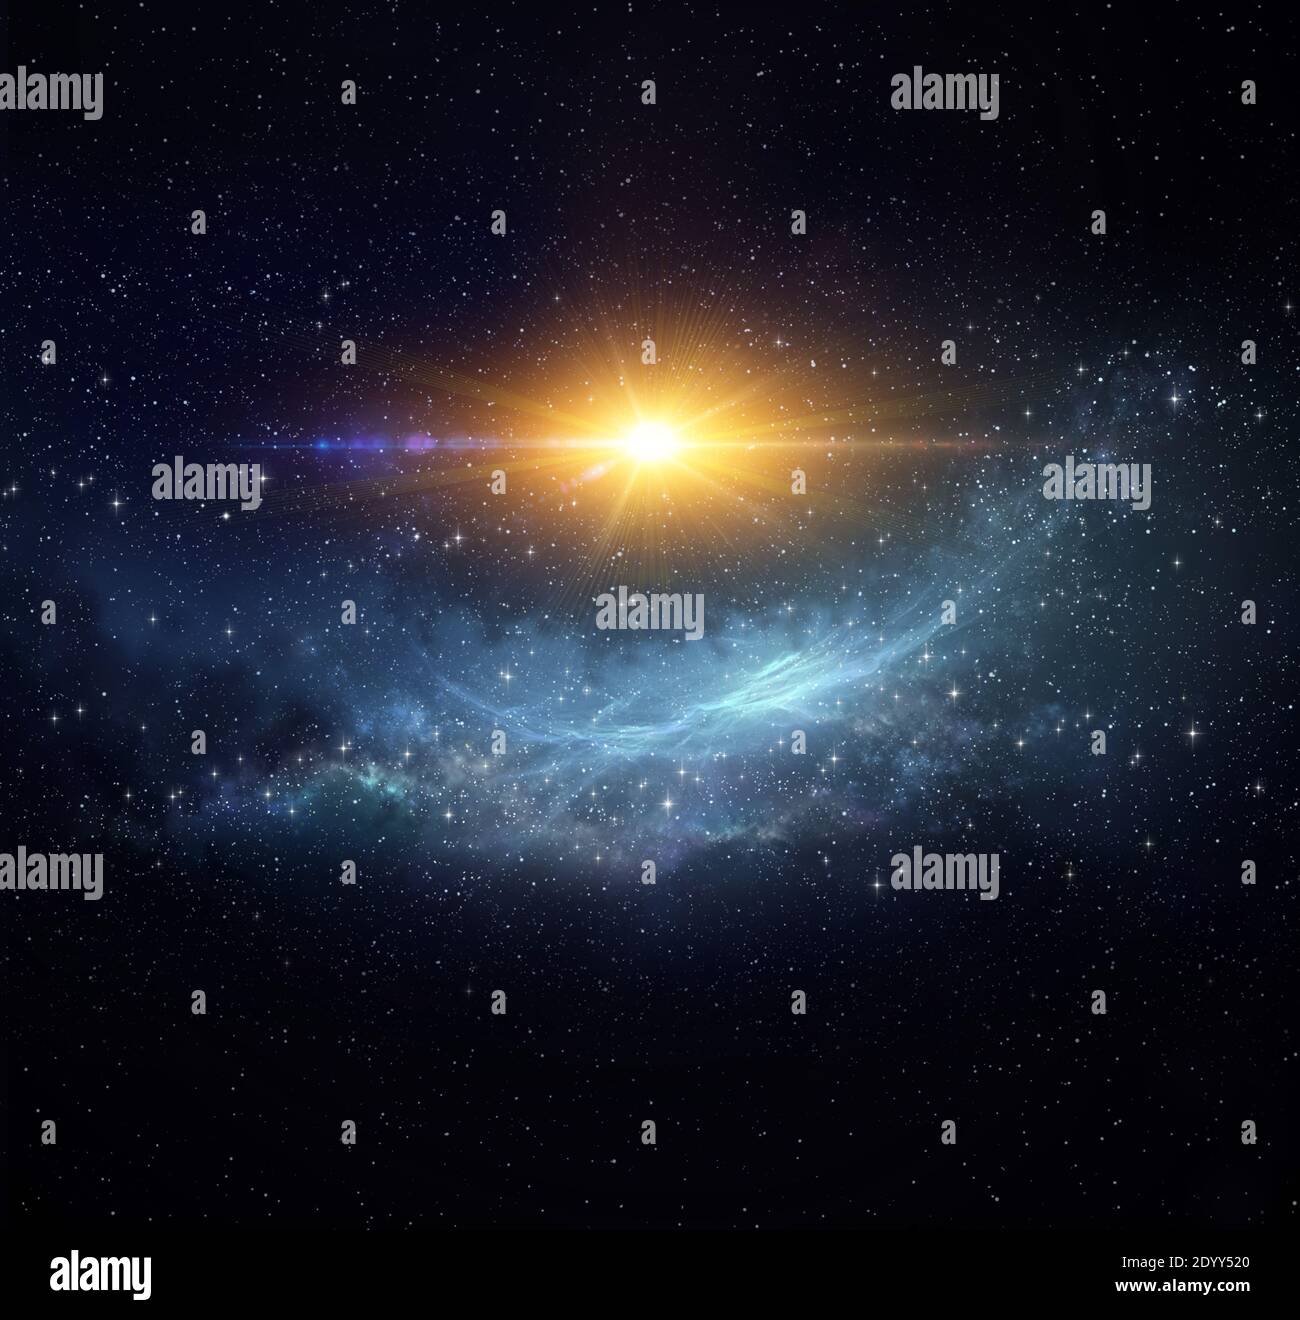 Galaxy, nebula, sun and stars constellations in Universe. Giant explosion into deep space. Stock Photo